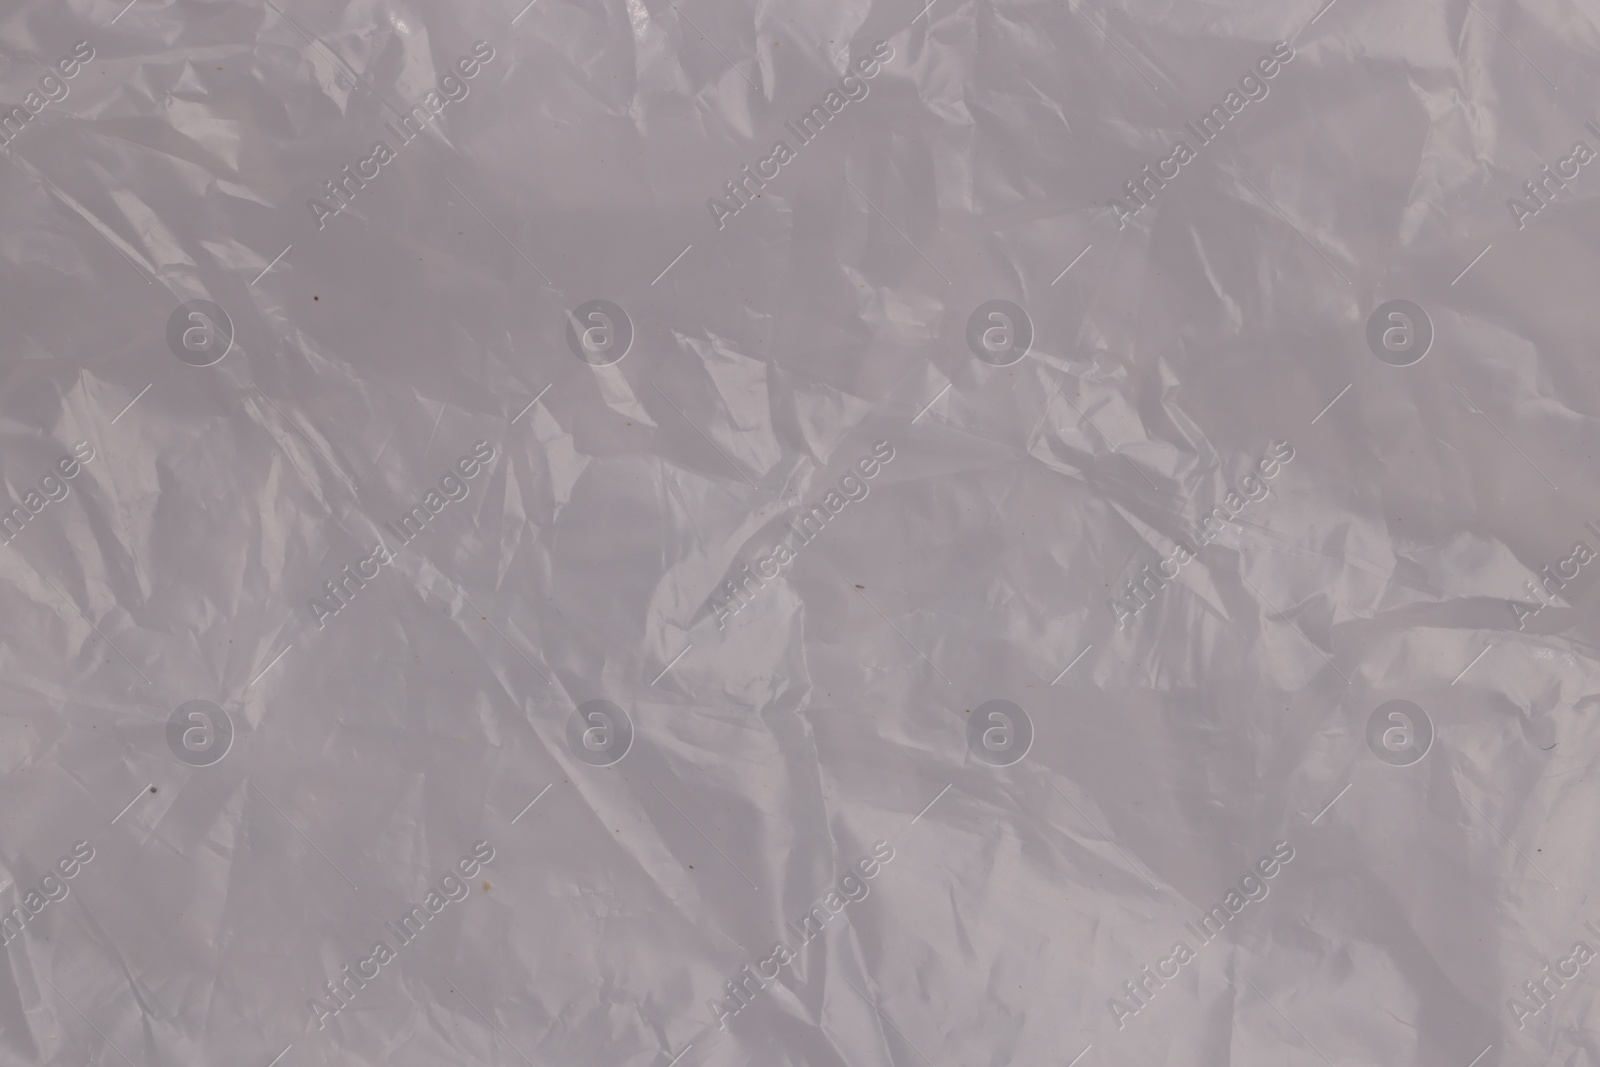 Photo of Crumpled transparent plastic bag as background, top view